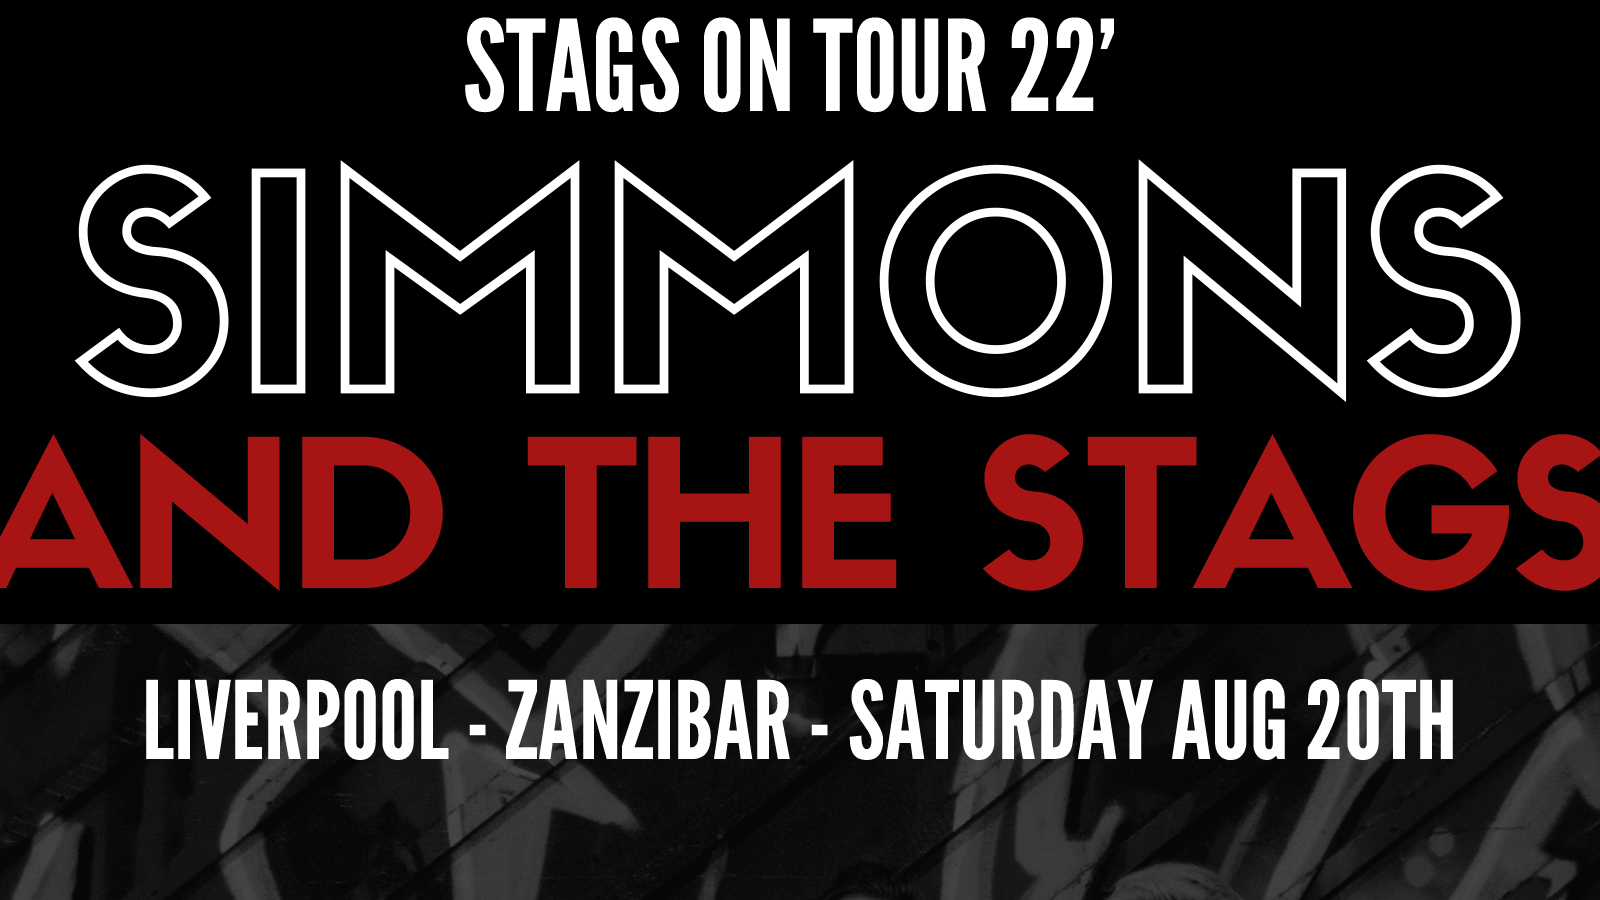 Simmons & The Stags